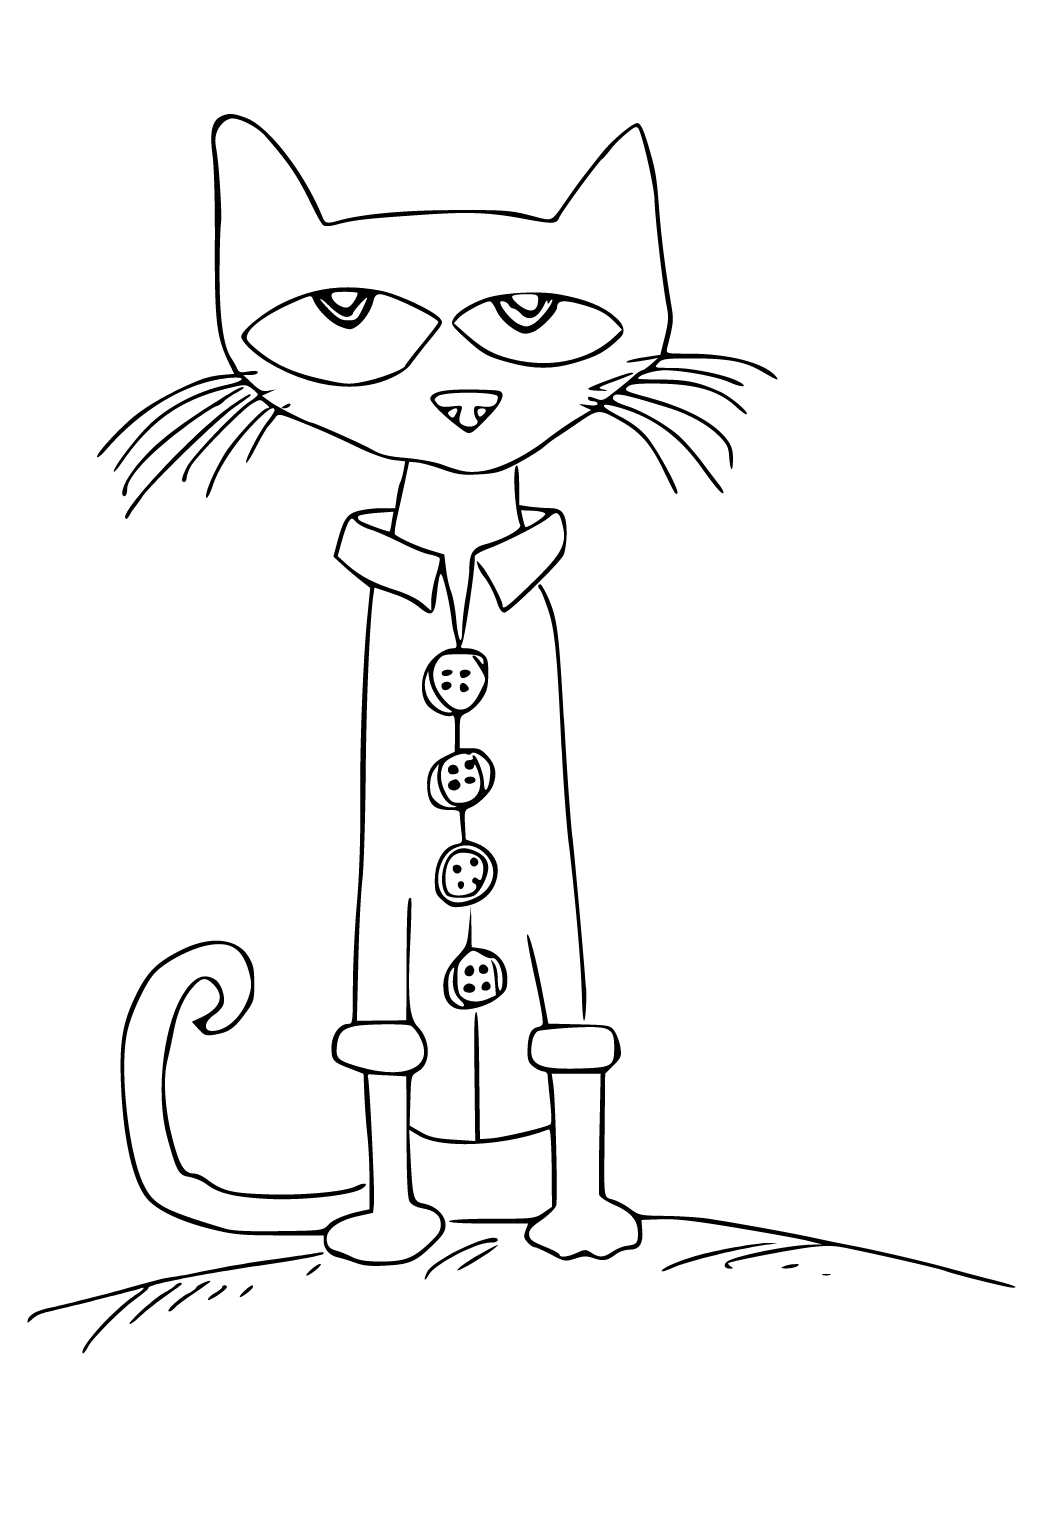 Free printable pete the cat mustache coloring page for adults and kids